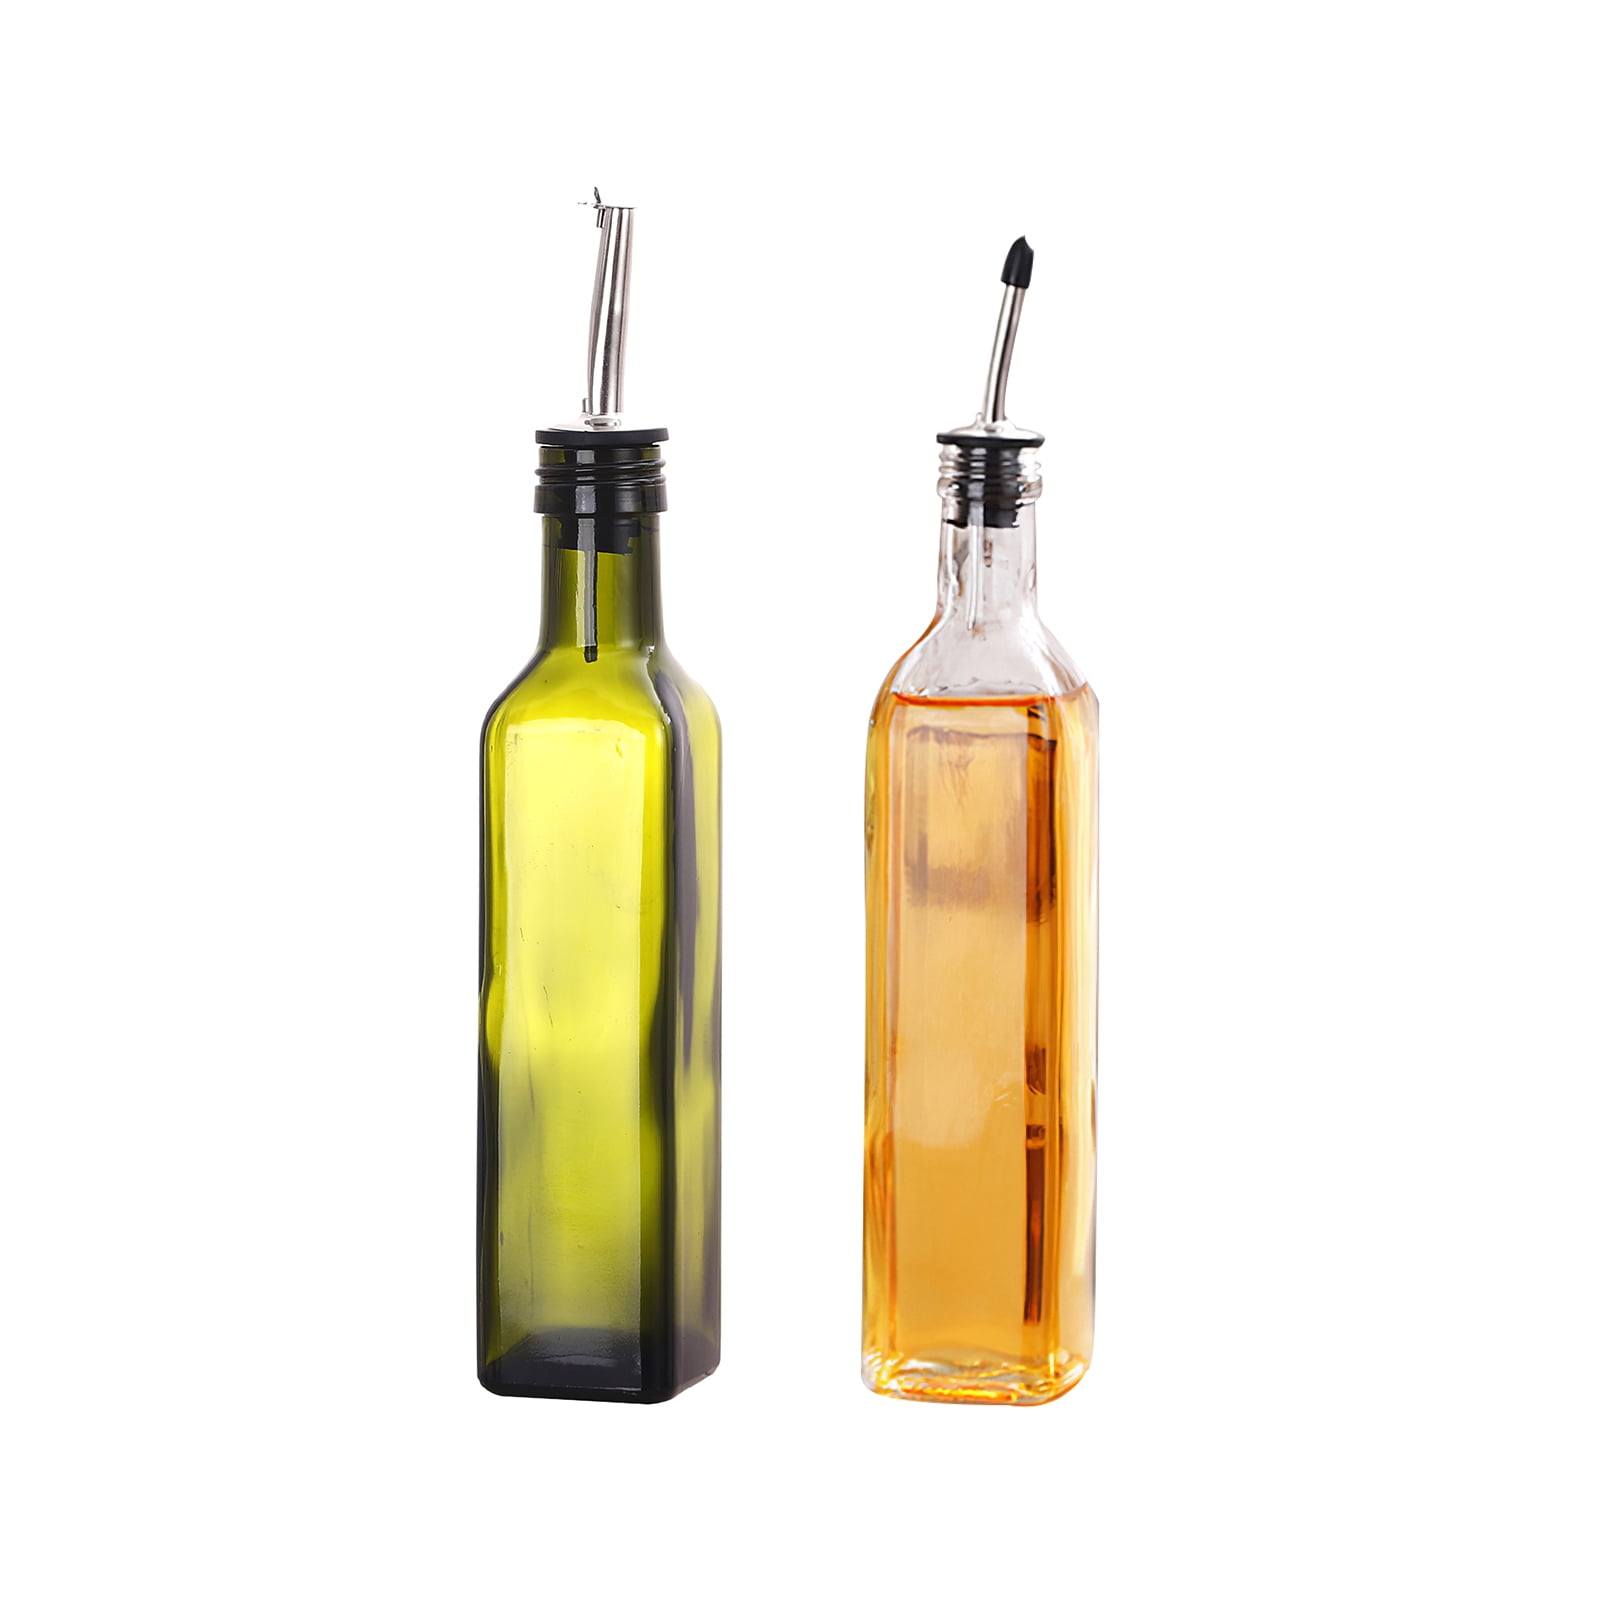 FARI Olive Oil Dispenser Bottles 2 Automatic Opening and Closing Oil Pot 2 Pack of 500ml Oil and Vinegar Lead-Free Glass Cooking Oil Cruet for Kitchen